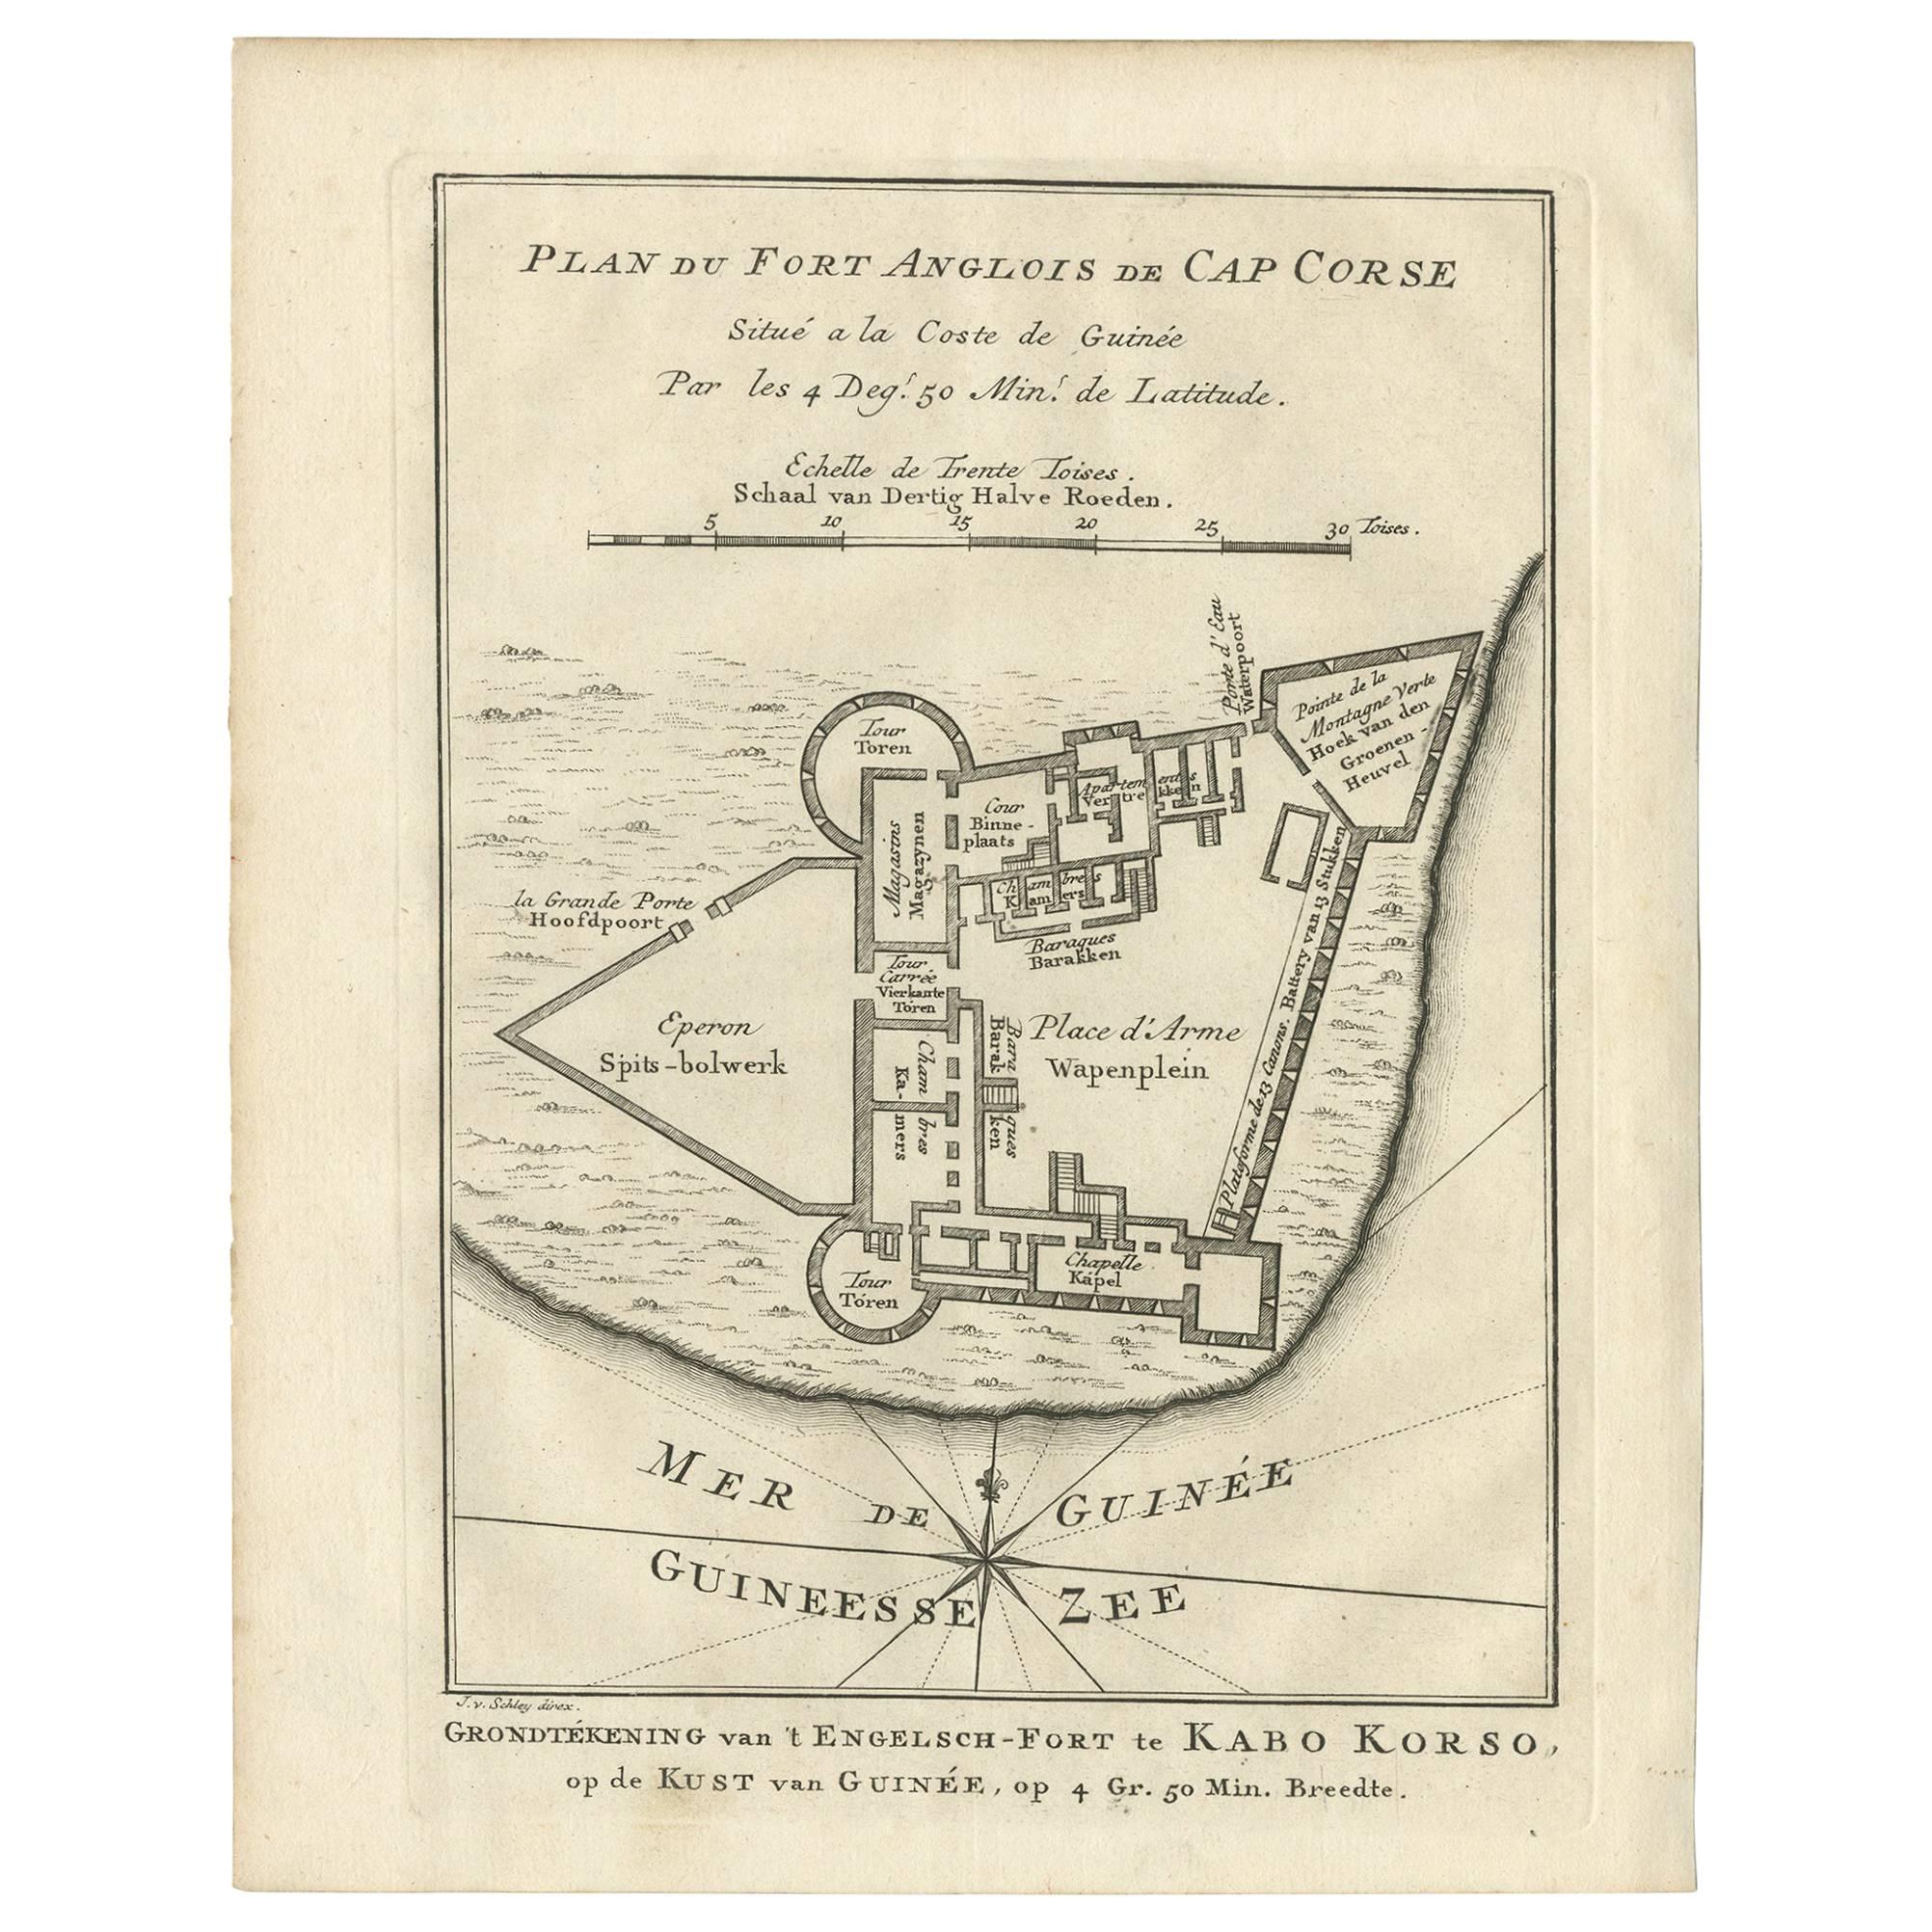 Antique Print of the English Fort of Cap Corse 'Africa' by J. van Schley, 1760